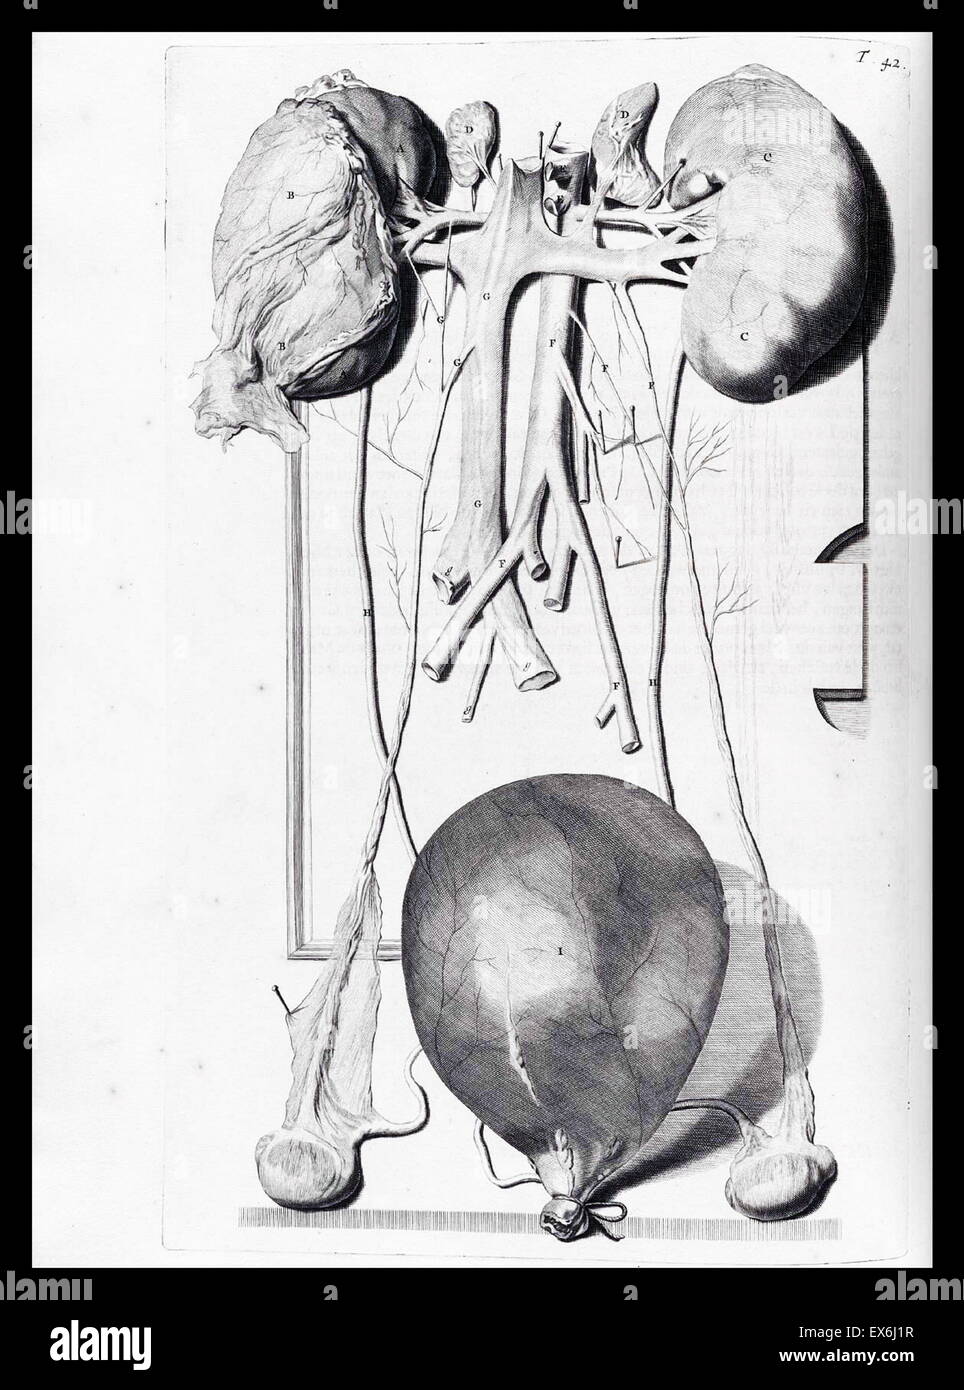 Illustrations by Govard Bidloo, from the anatomy textbook 'Ontleding des menschelyken Lichaams'. (Amsterdam 1690).Govard Bidloo was born in Amsterdam in 1649 and became professor of anatomy at The Hague from 1688 to 1706 Stock Photo